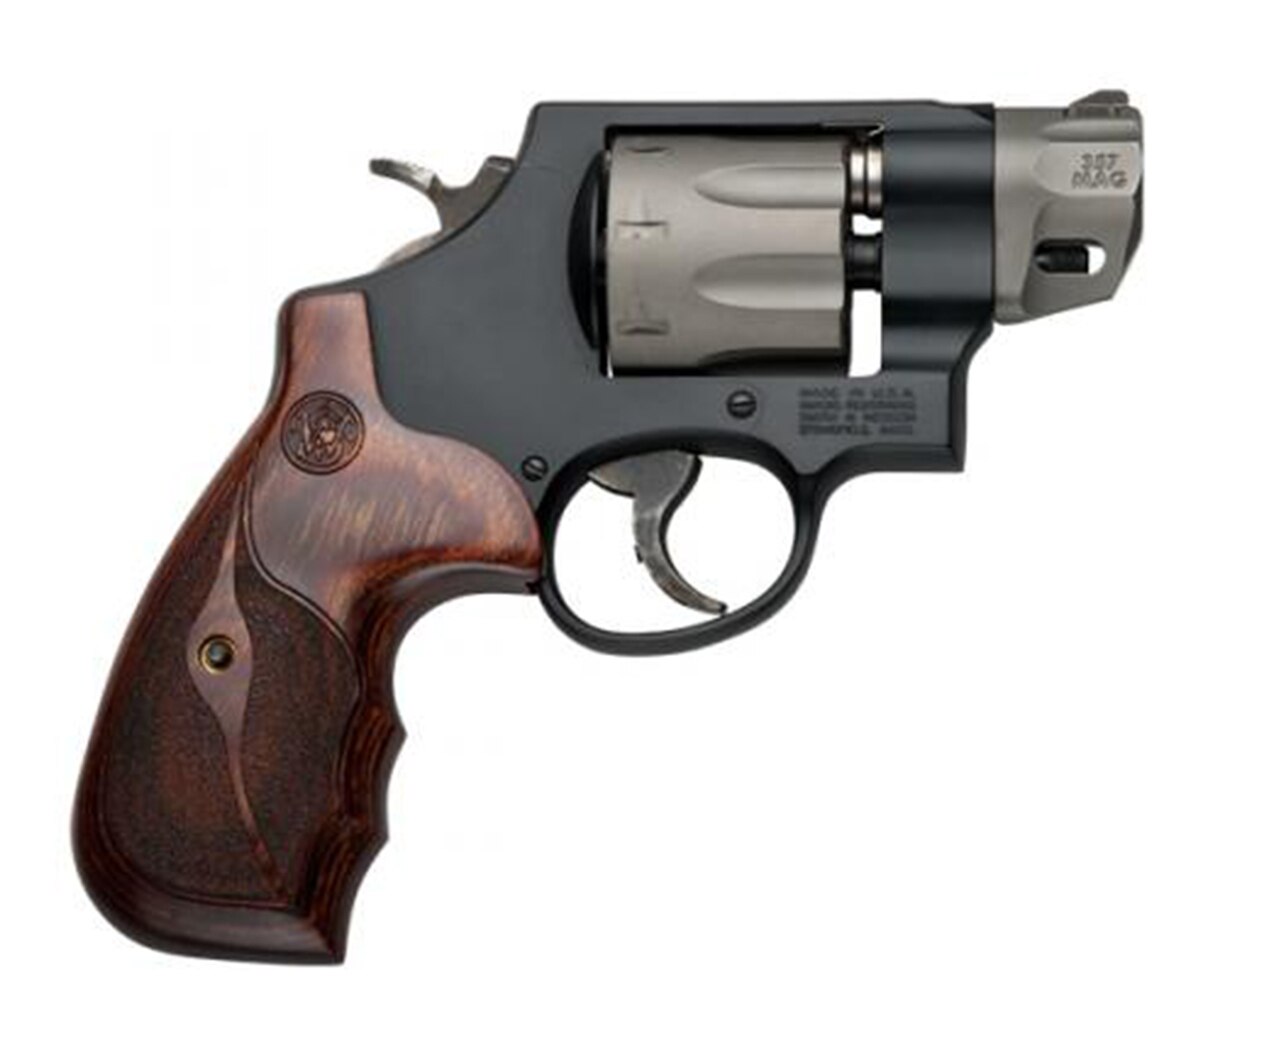 Image of Smith & Wesson 327 Performance Center 357 Mag/38 Spl 2" Barrel 8rd Capacity, Wood Grip Black